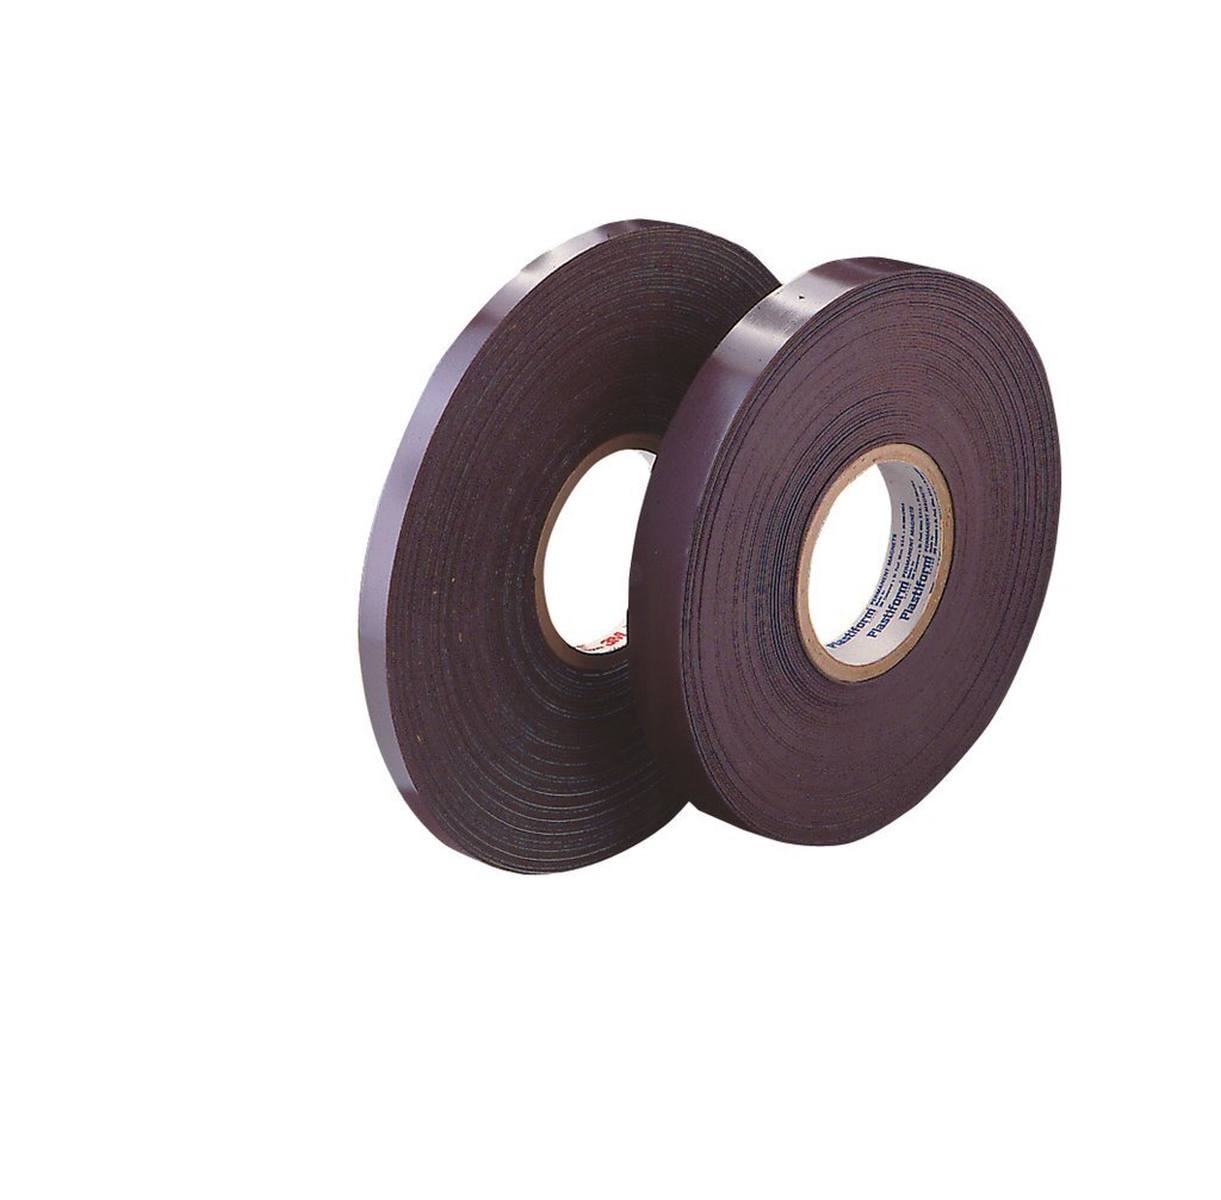 3M 1316 Magnetic adhesive tape, brown, 19 mm x 30.5 m, 0.9 mm